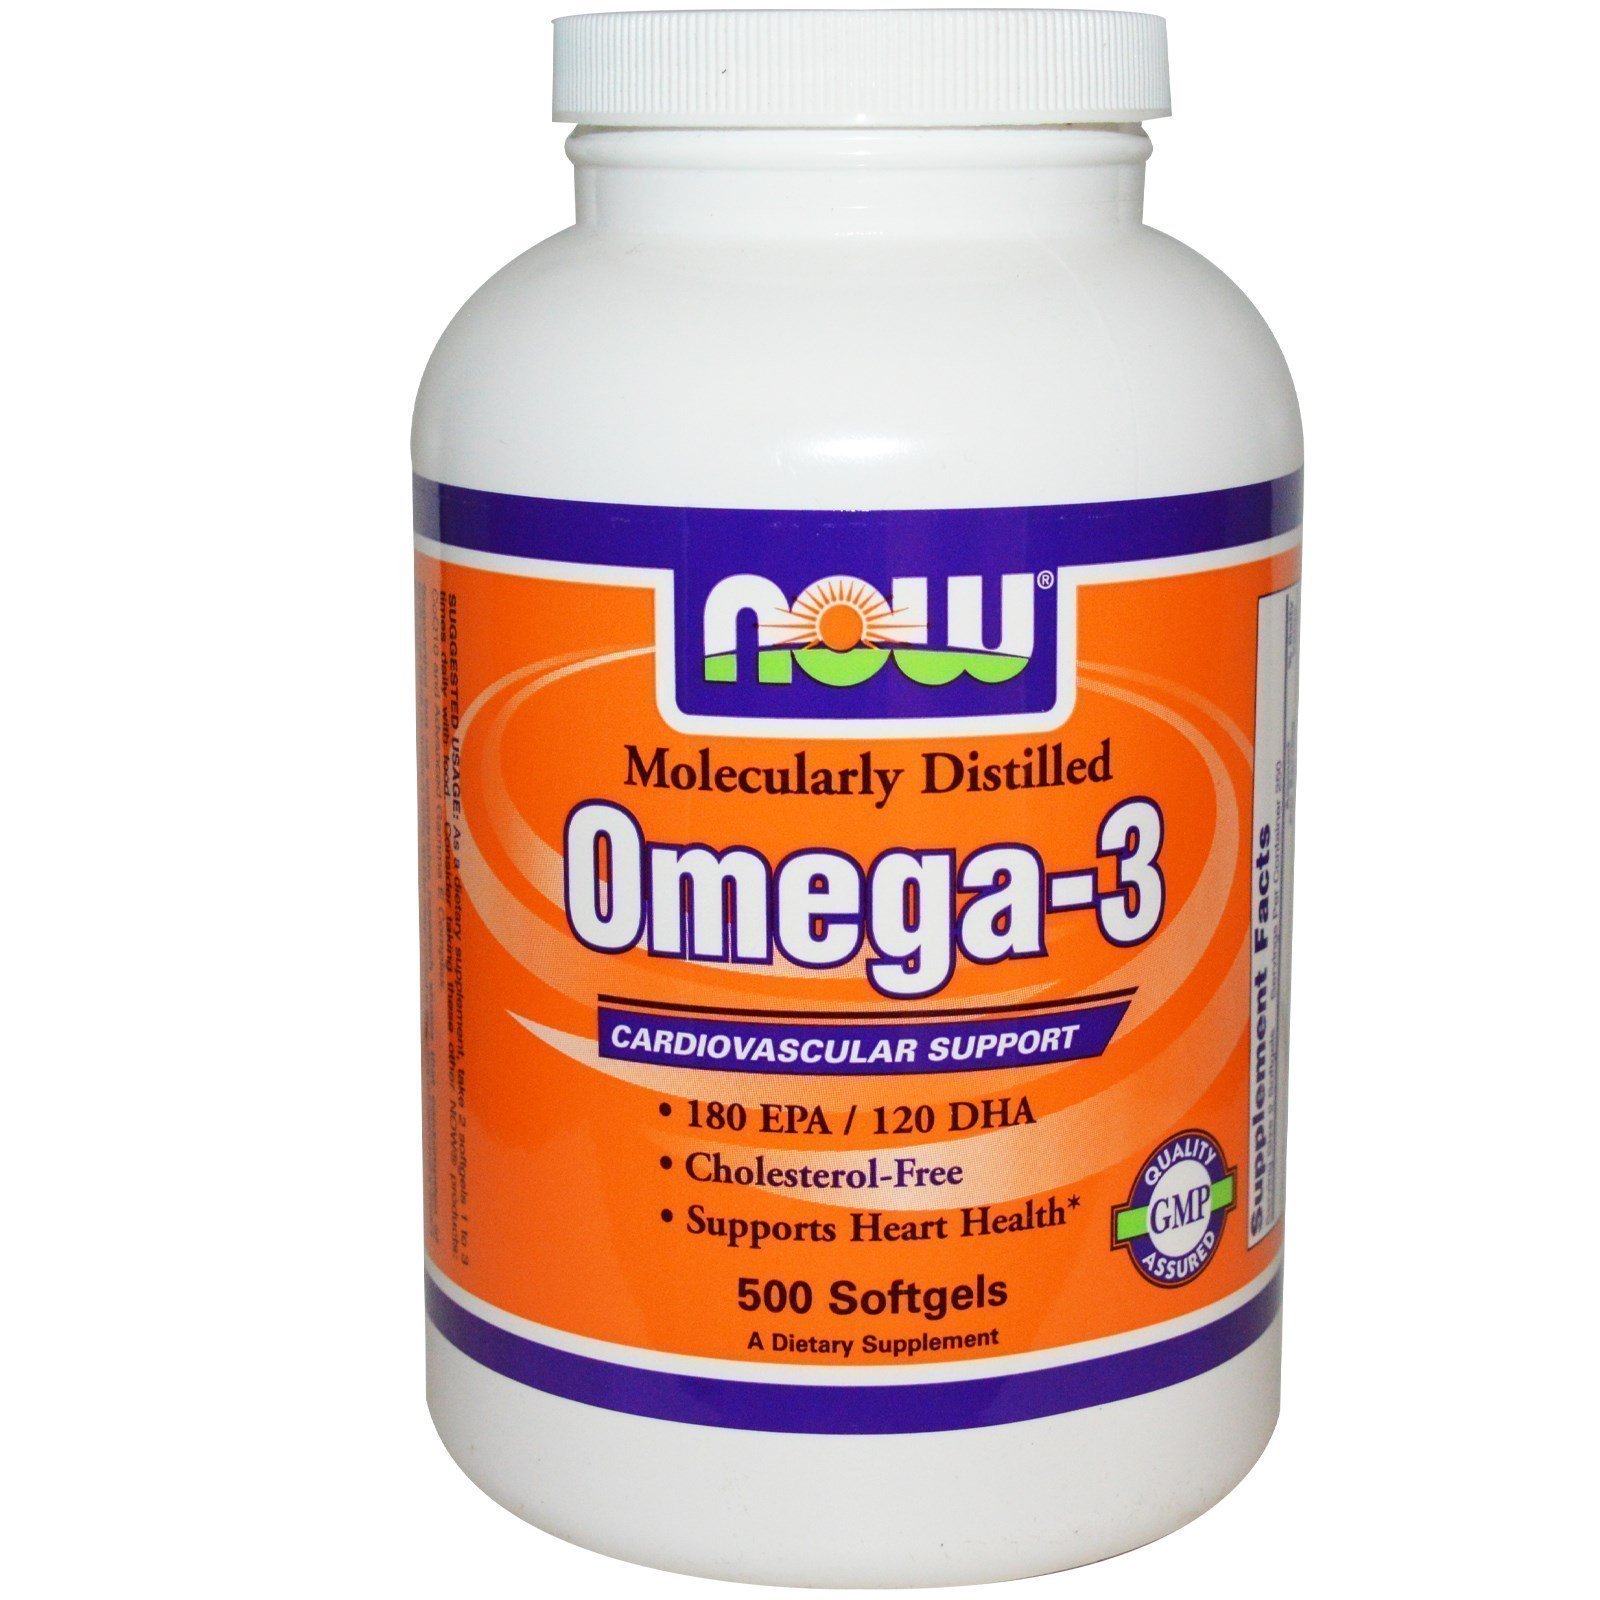 Omega 3 500 250. Omega-3 500 капс. Now foods. Now foods Omega 3 1000 MG. Омега 3 500 капсул. Омега 3 Now 500 капсул.